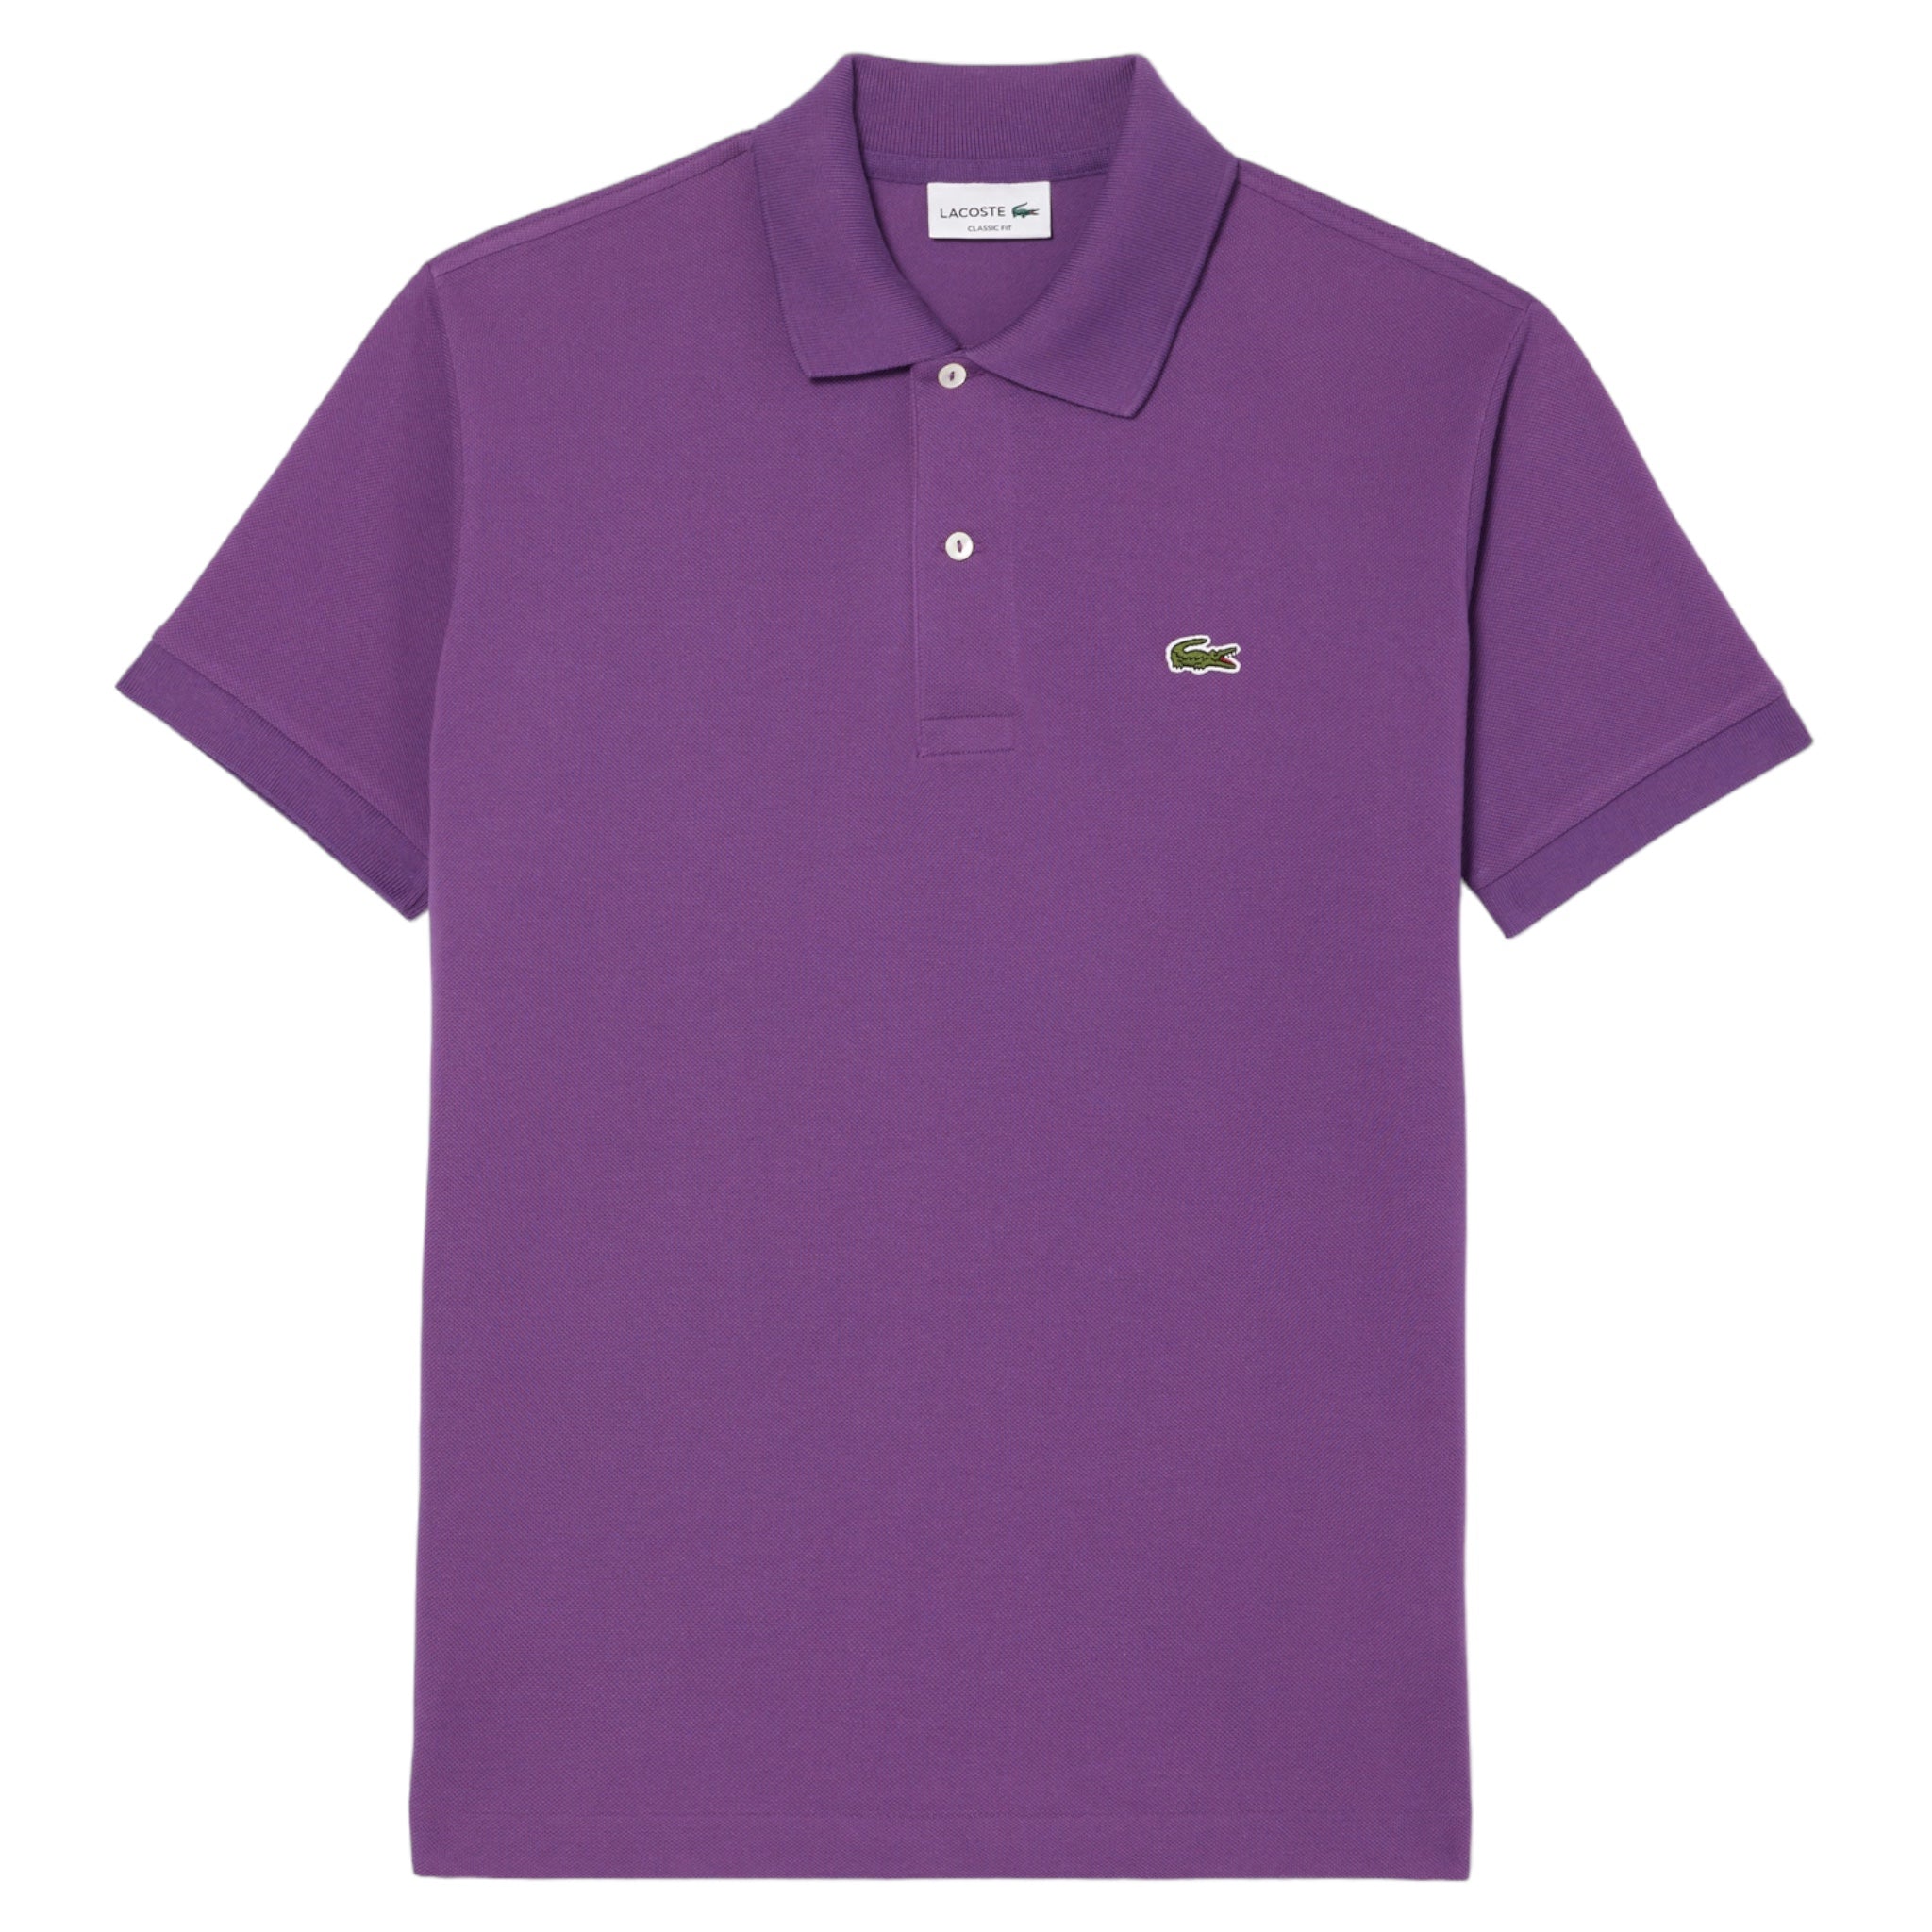 Polo Classic Fit Viola L121200IY2 Lacoste